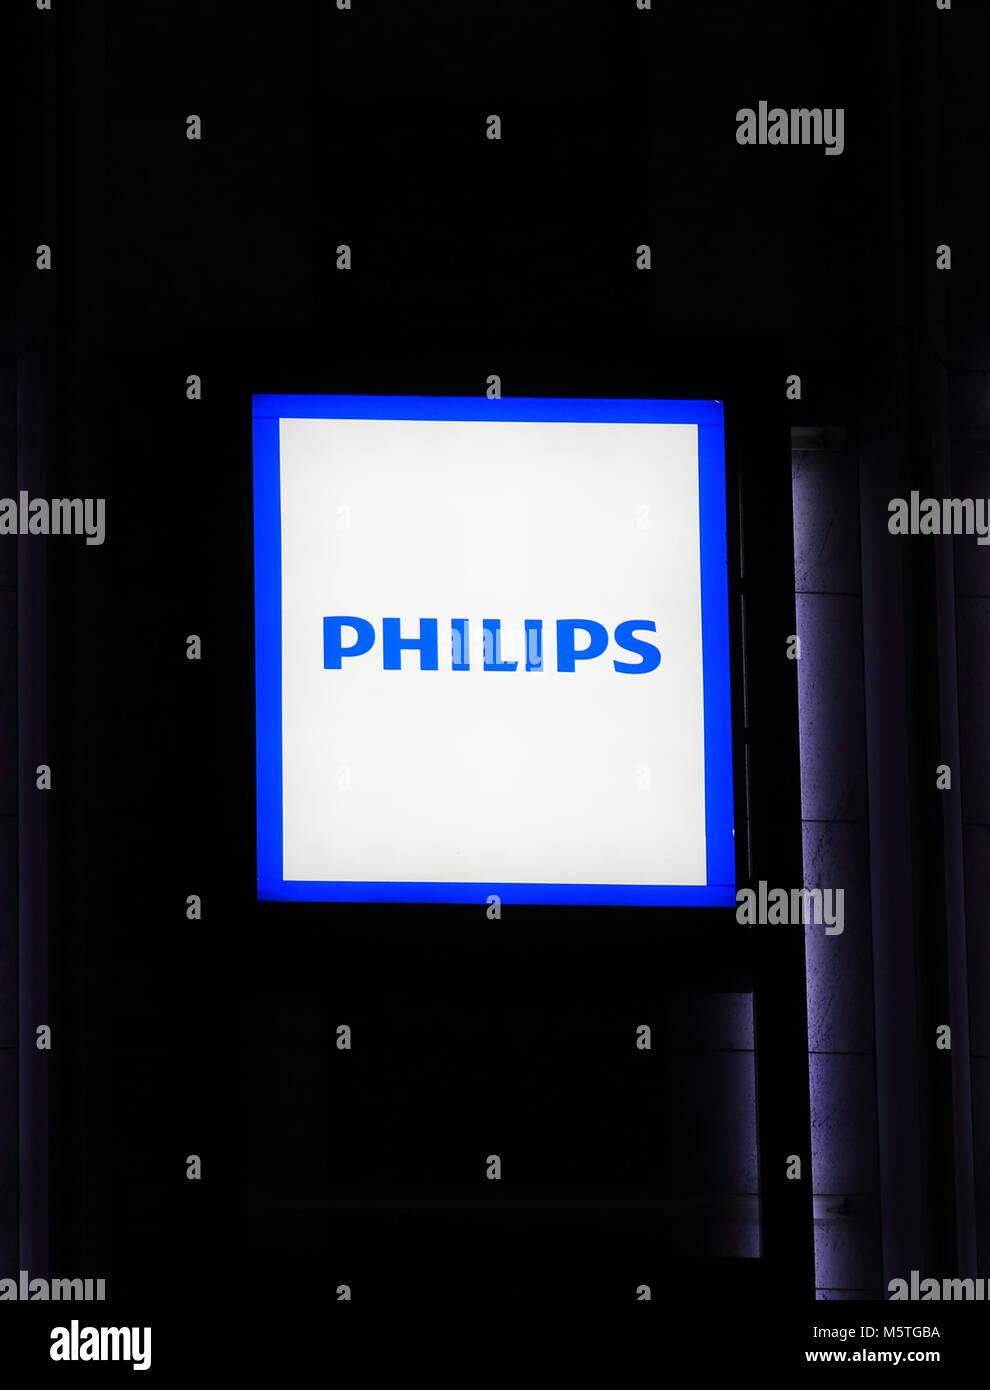 Philips technology company logo. Philips is a Dutch technology company headquartered in Amsterdam founded in 1891. Stock Photo